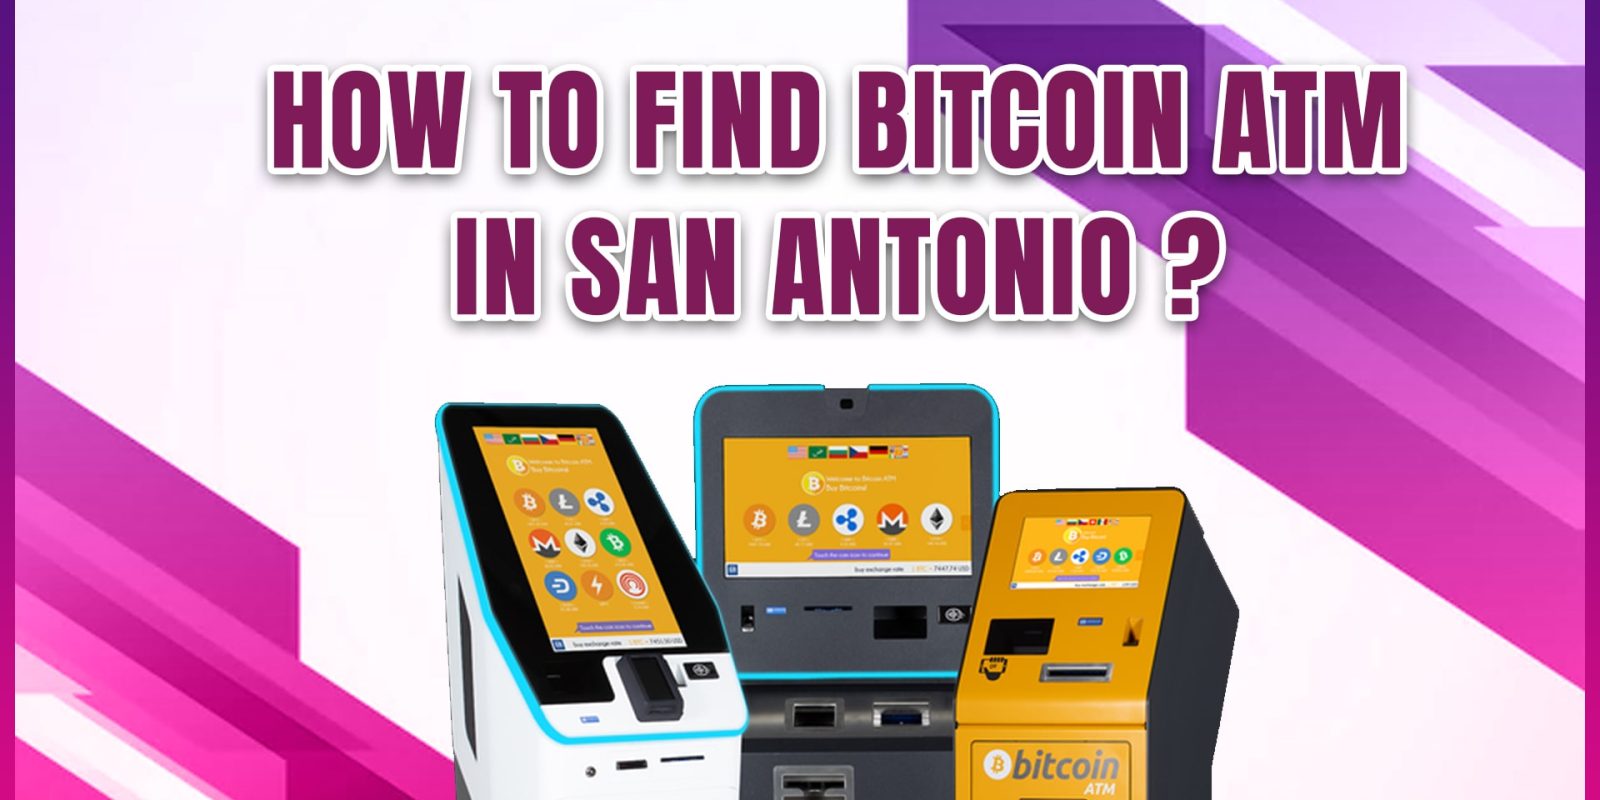 How to Find Bitcoin ATM in San Antonio